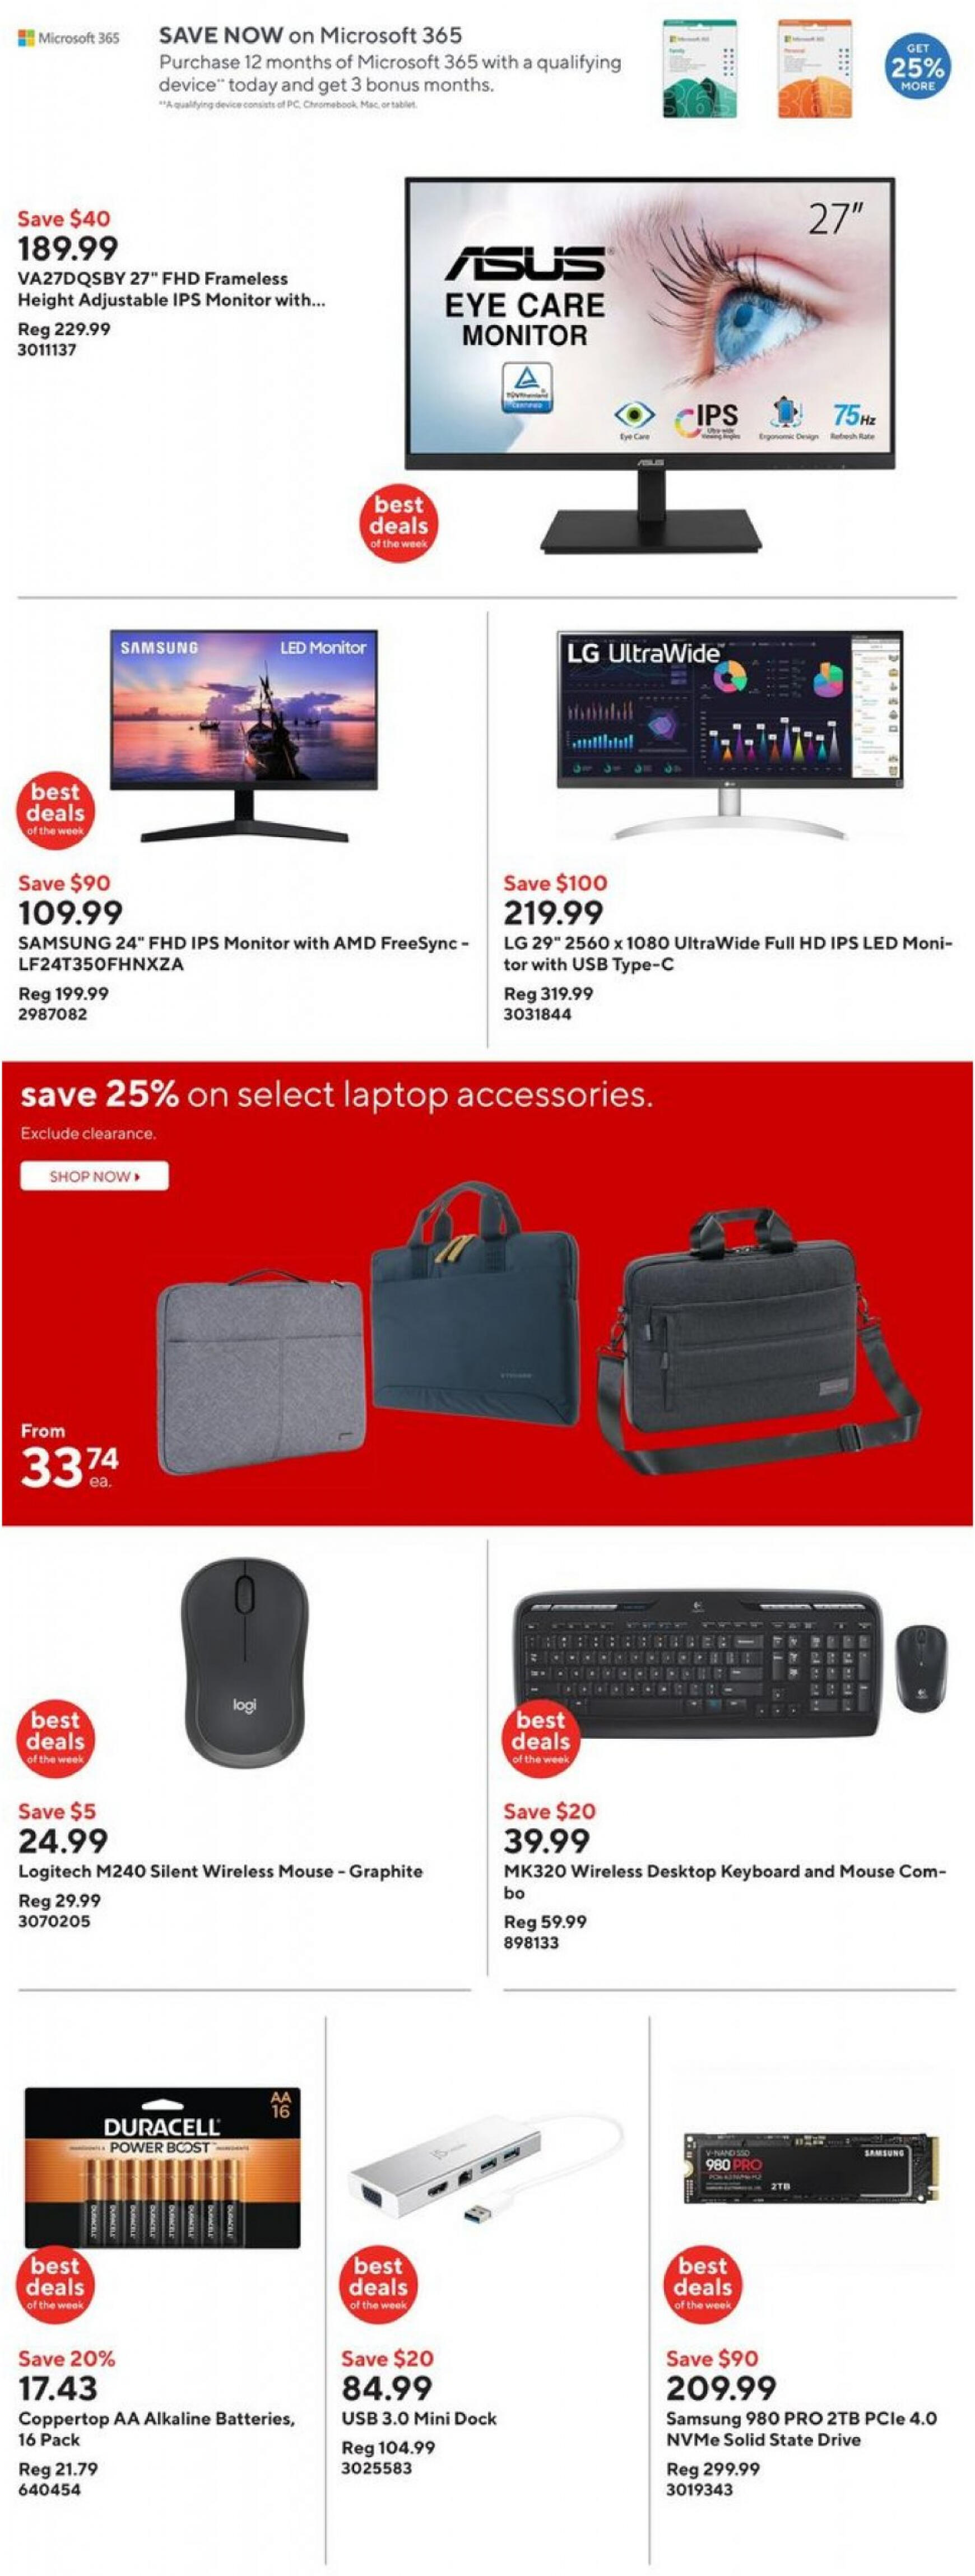 staples - Staples - Weekly flyer current 10.04. - 17.04. - page: 5